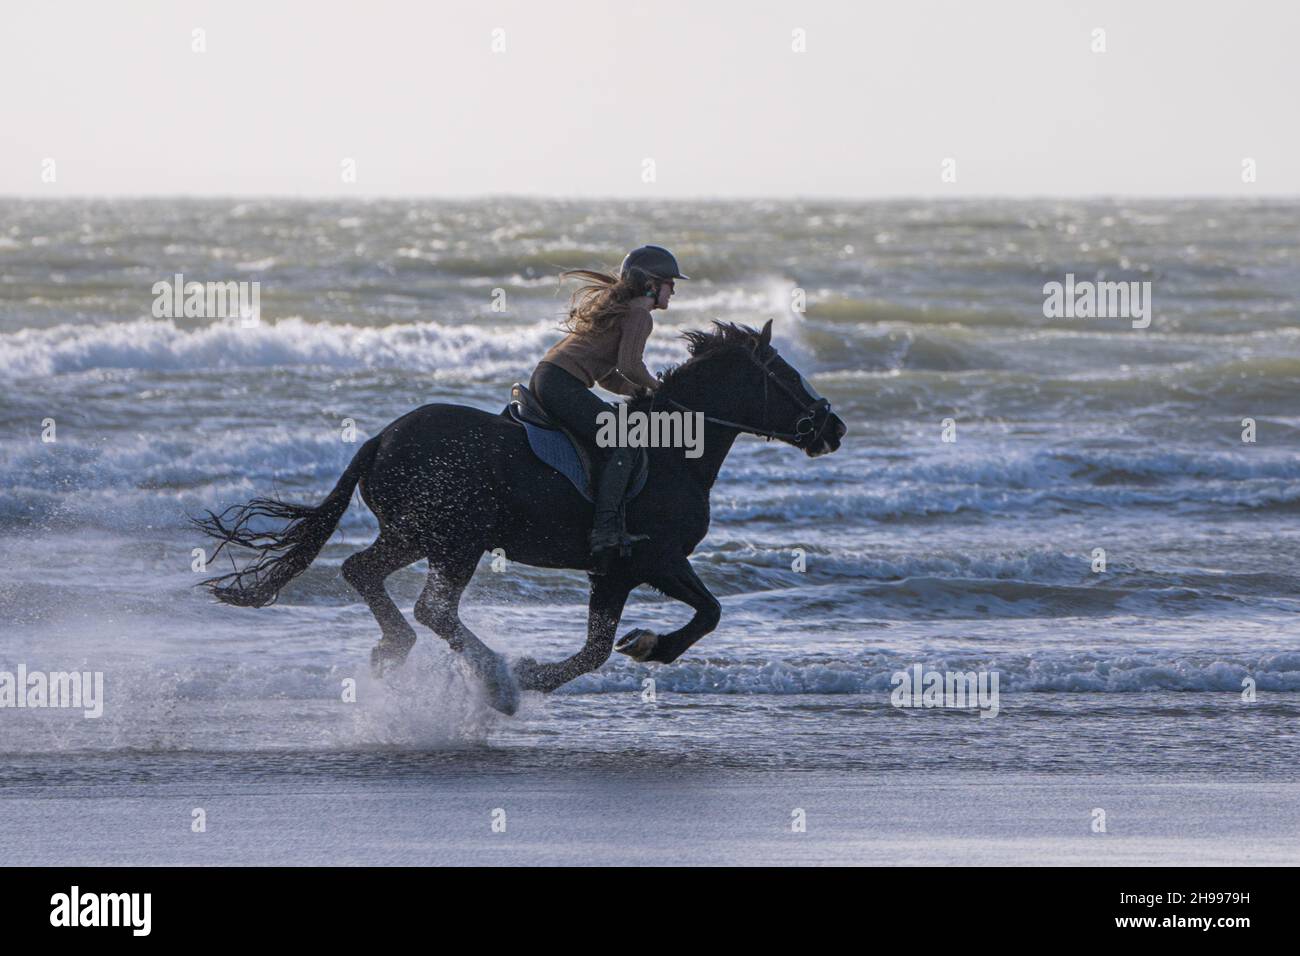 A young person with flowing hair, horse riding on the edge of the water on West Wittering beach in West Sussex Stock Photo